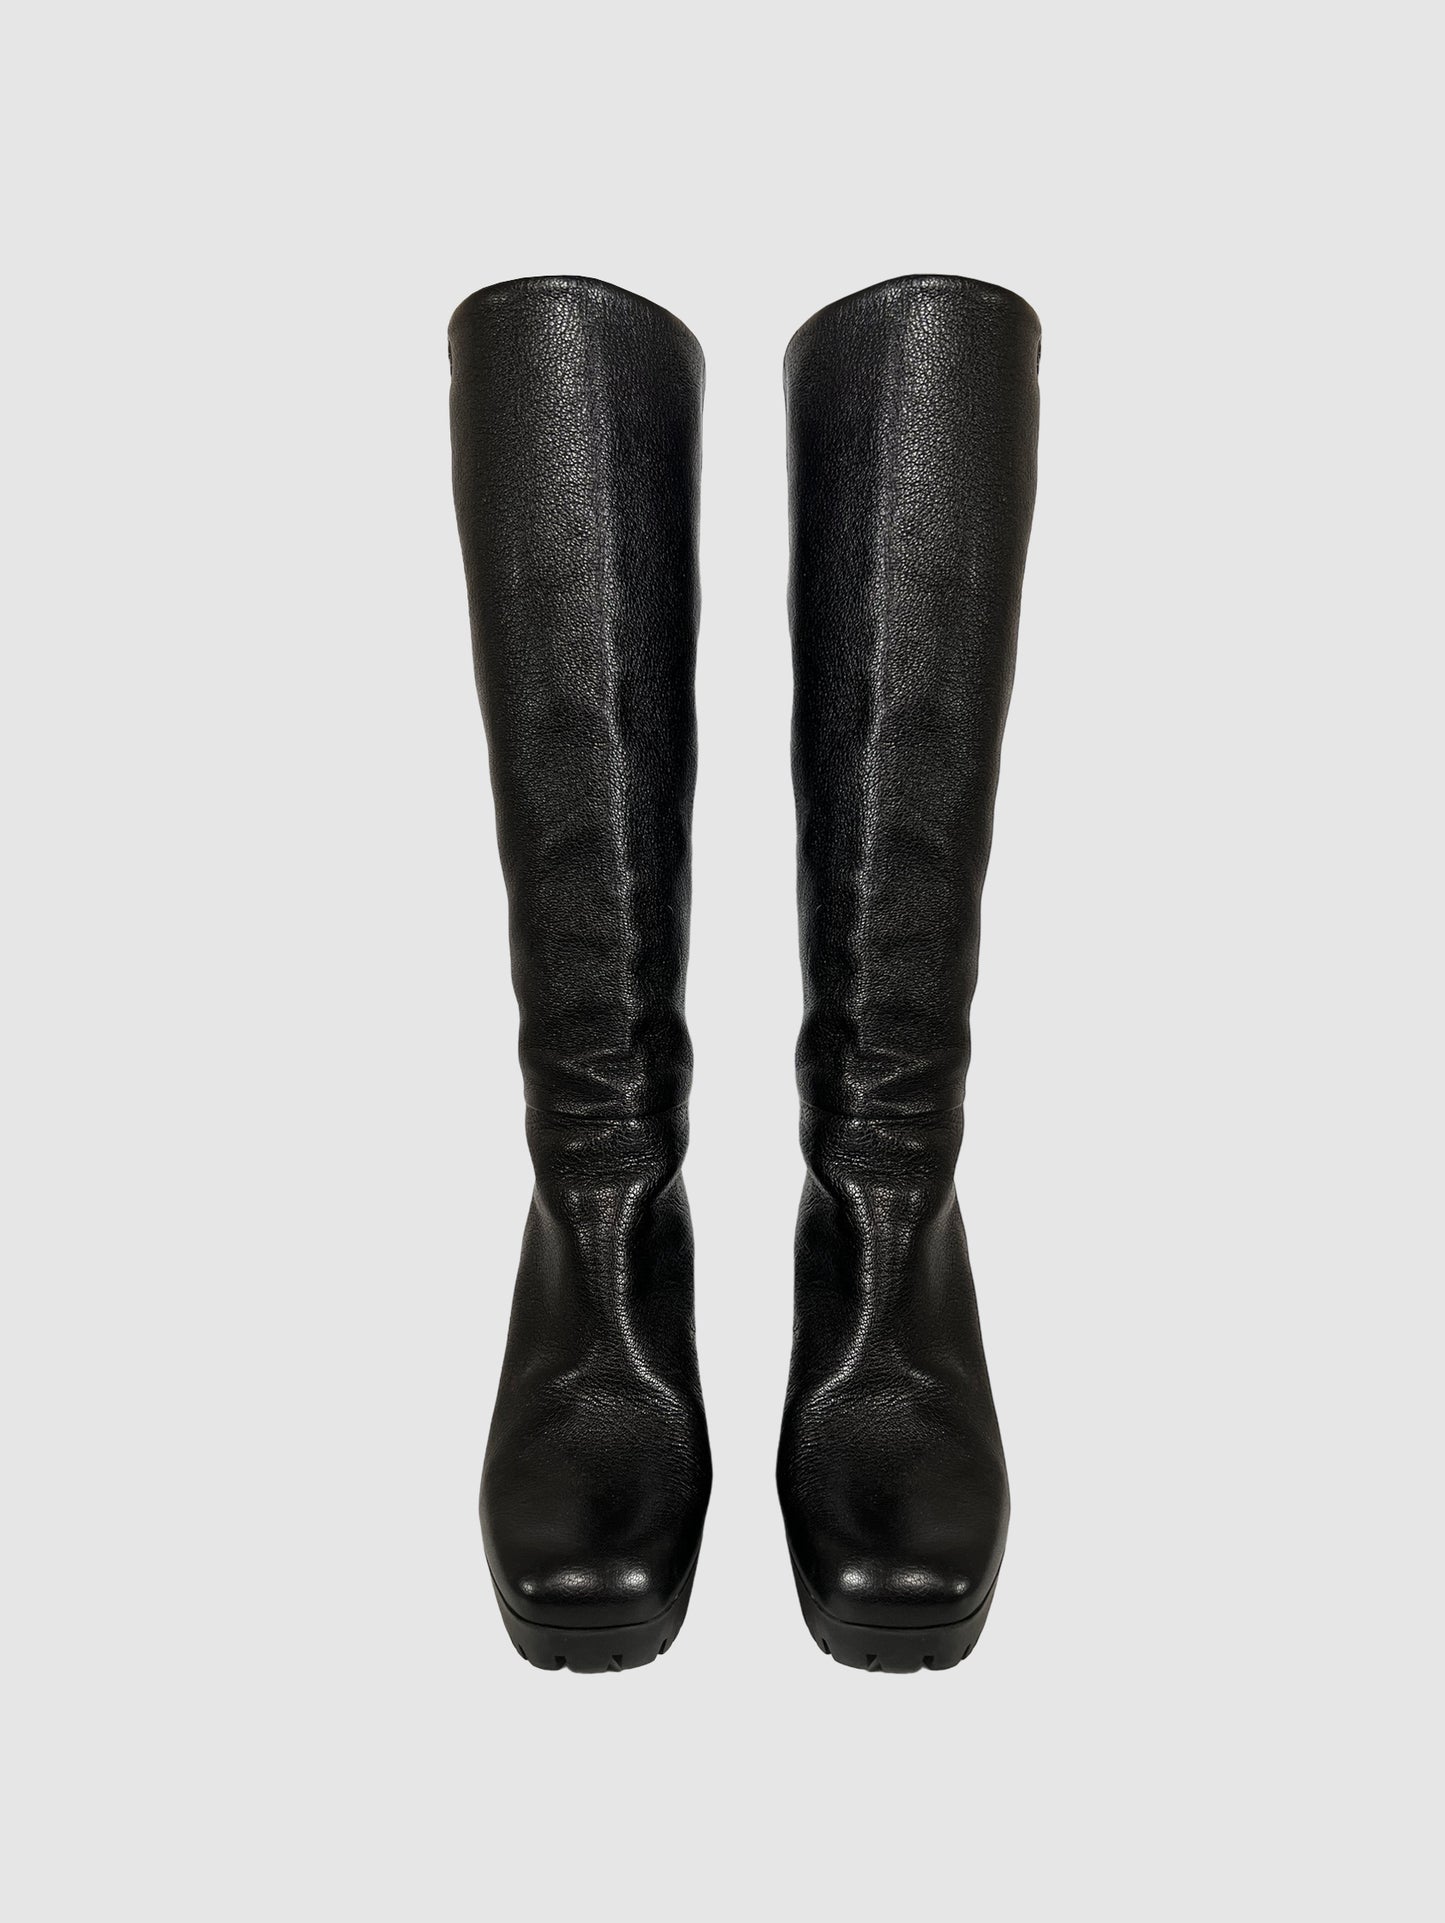 Gucci Leather Knee-High Wedge Boots - Size 39.5